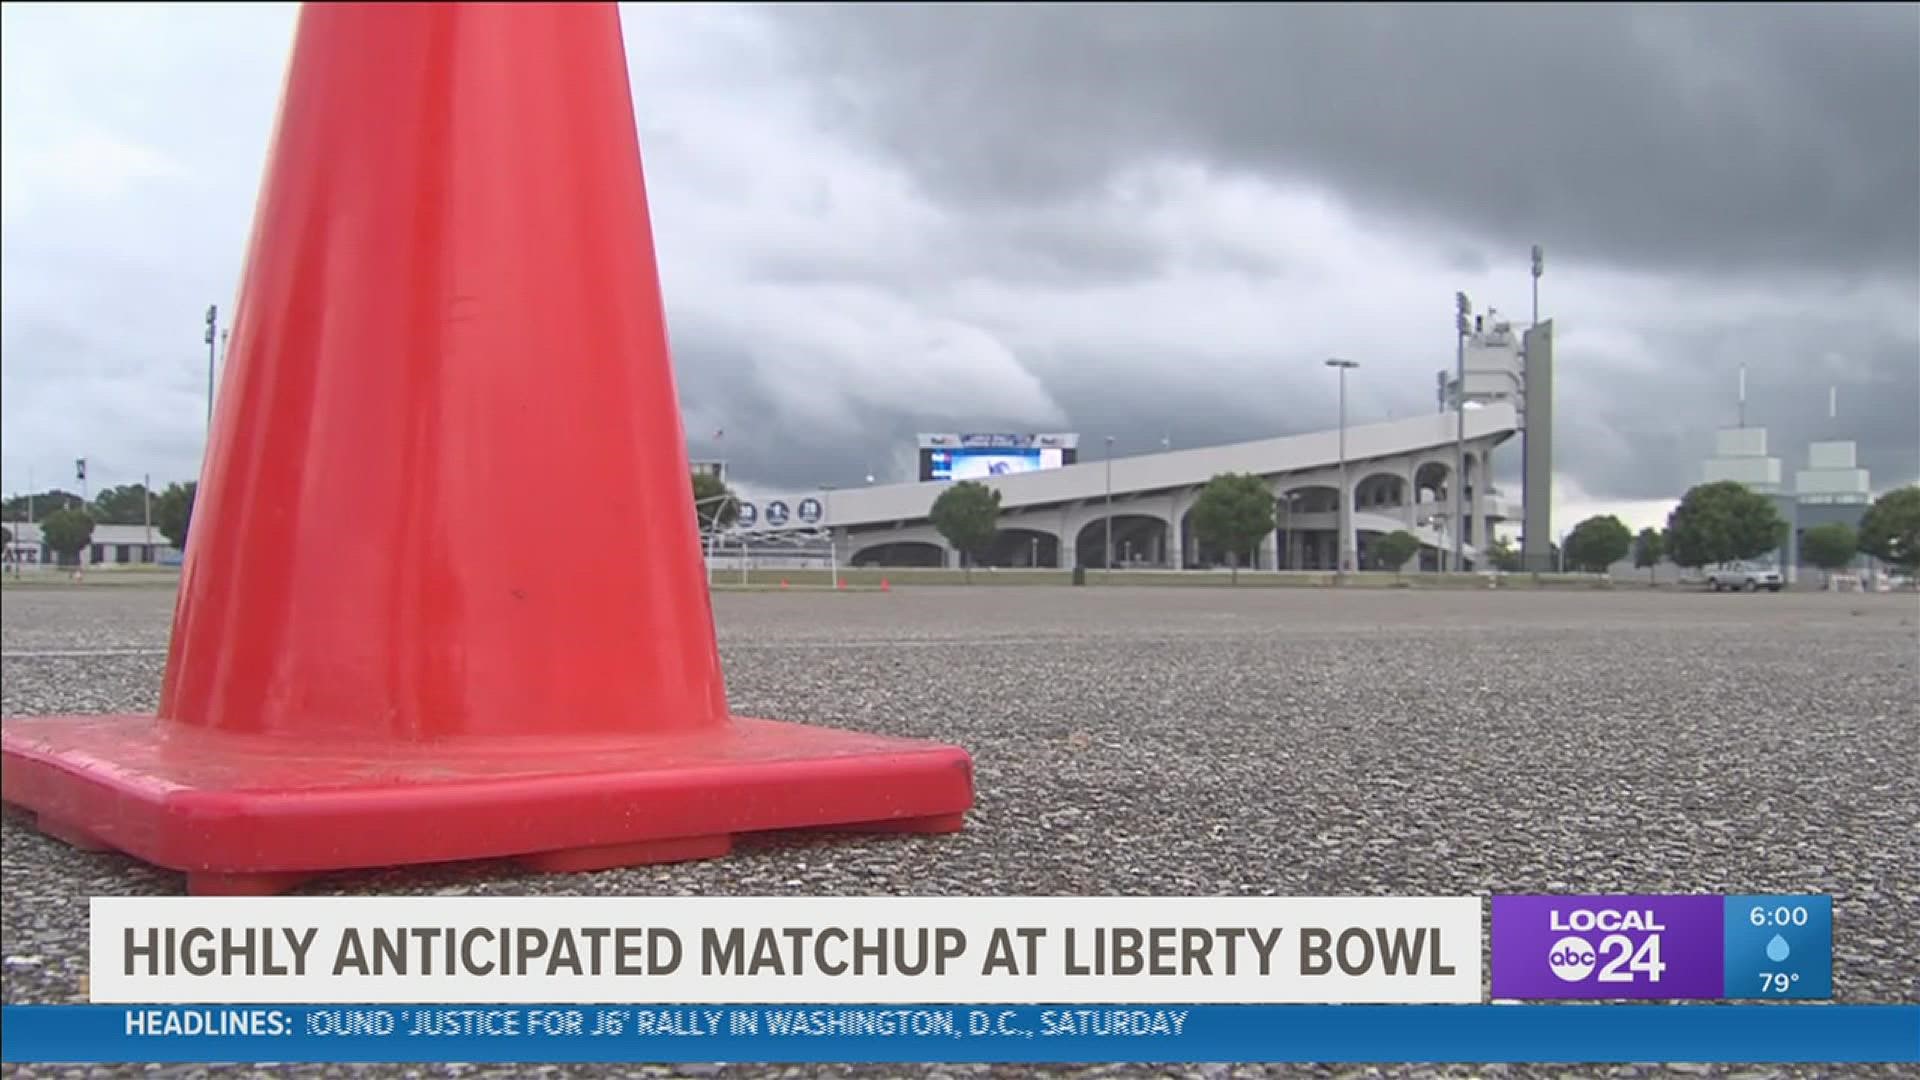 The Tigers are seeking their first win against the Bulldogs at the Liberty Bowl since 1988.